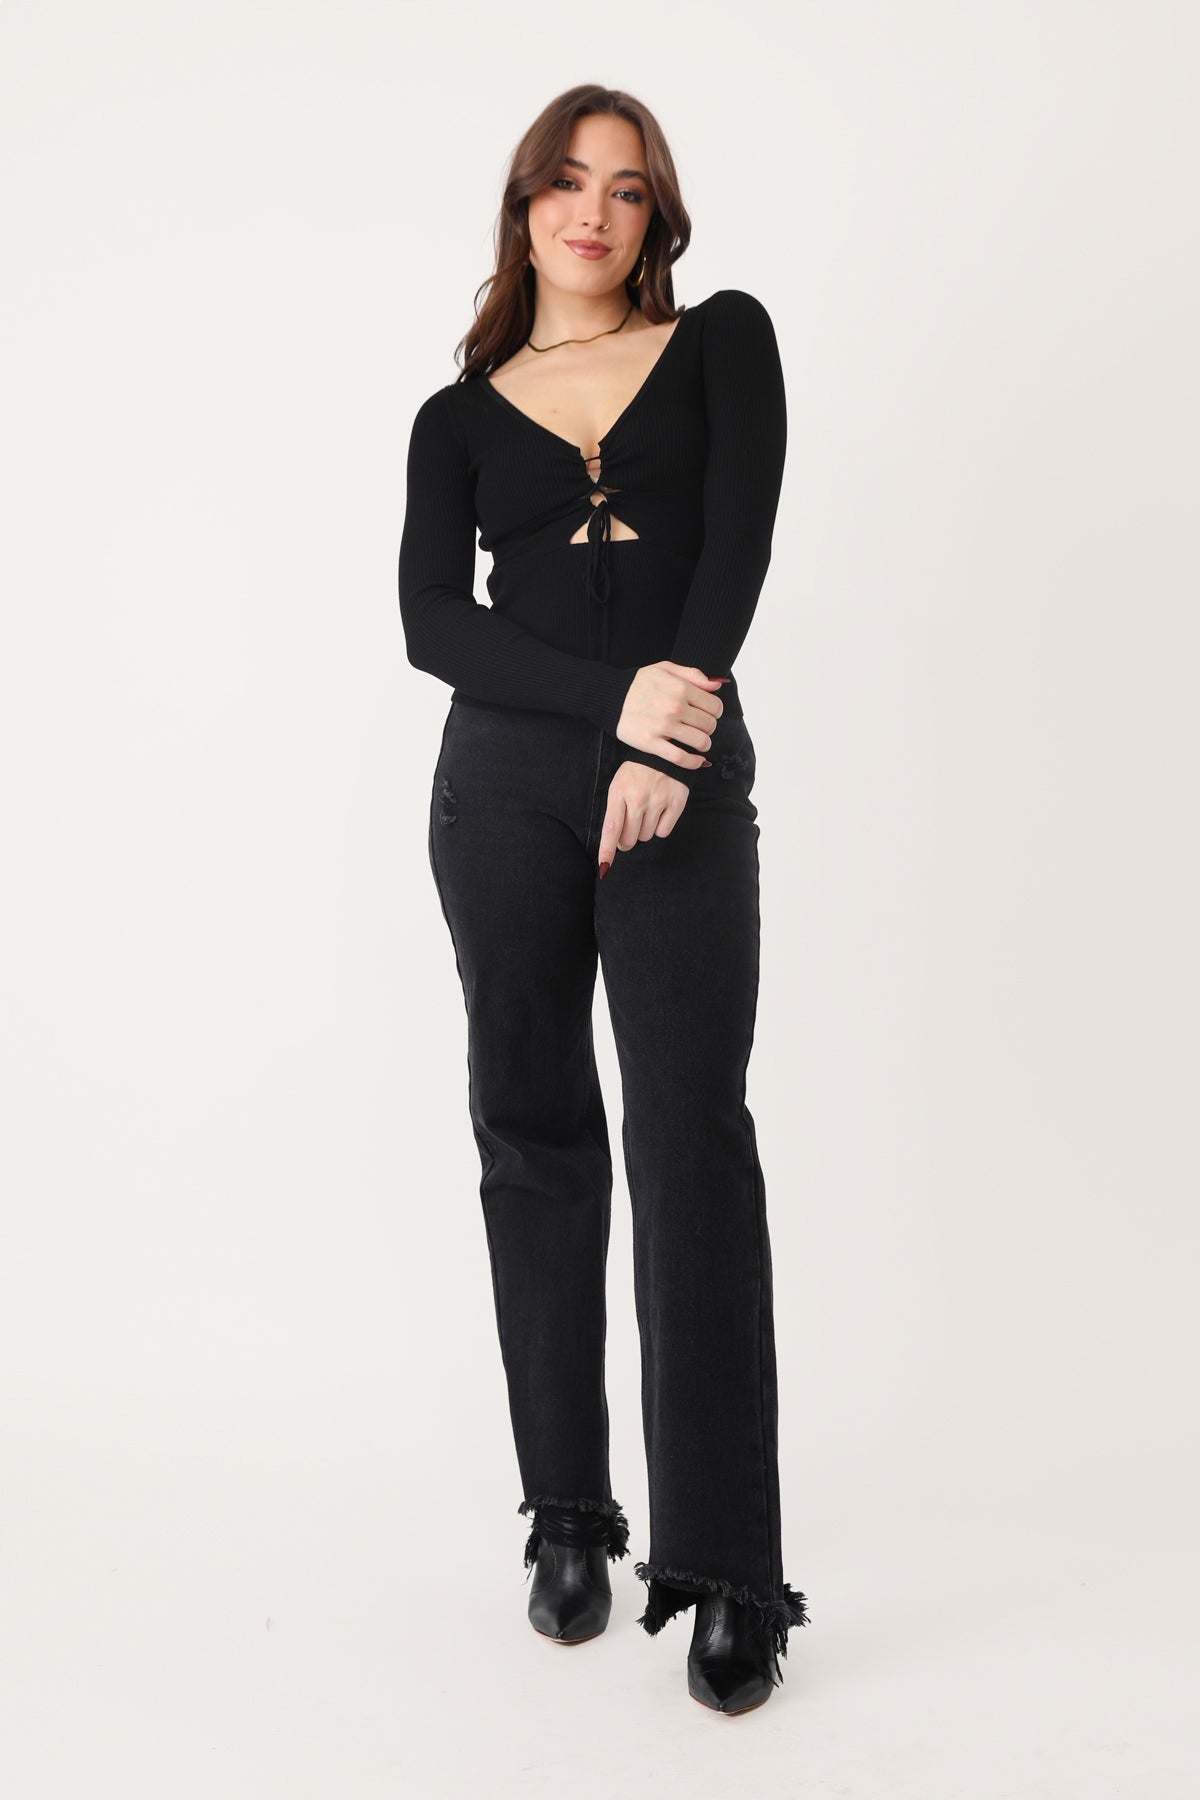 STEPPING OUT BLACK LONG SLEEVE TOP